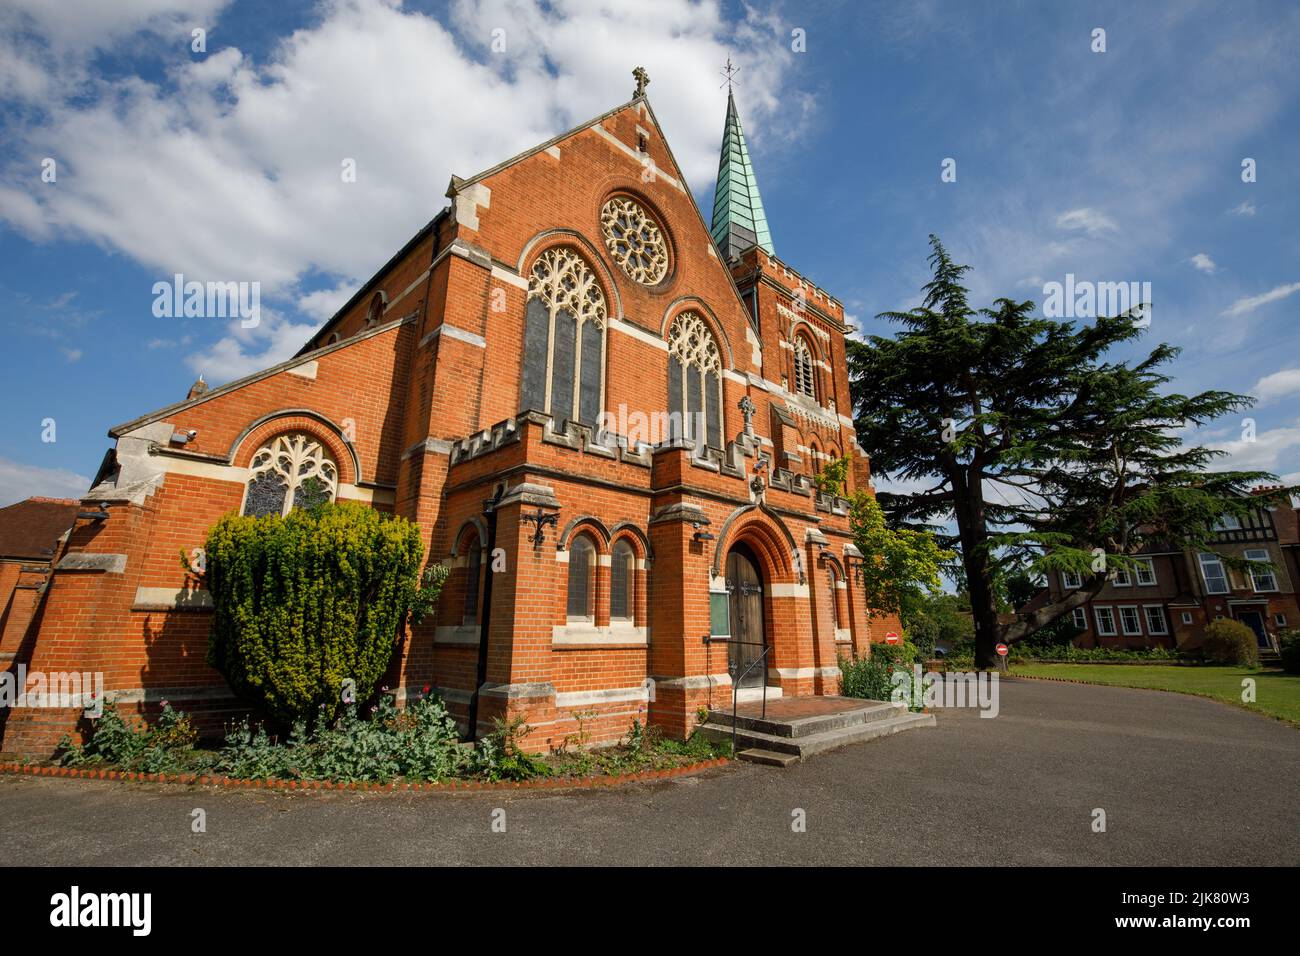 St. Peter's Church, A Victorian church built in red brick. Staines-upon-Thames, site of filming for the film The Omen. Stock Photo